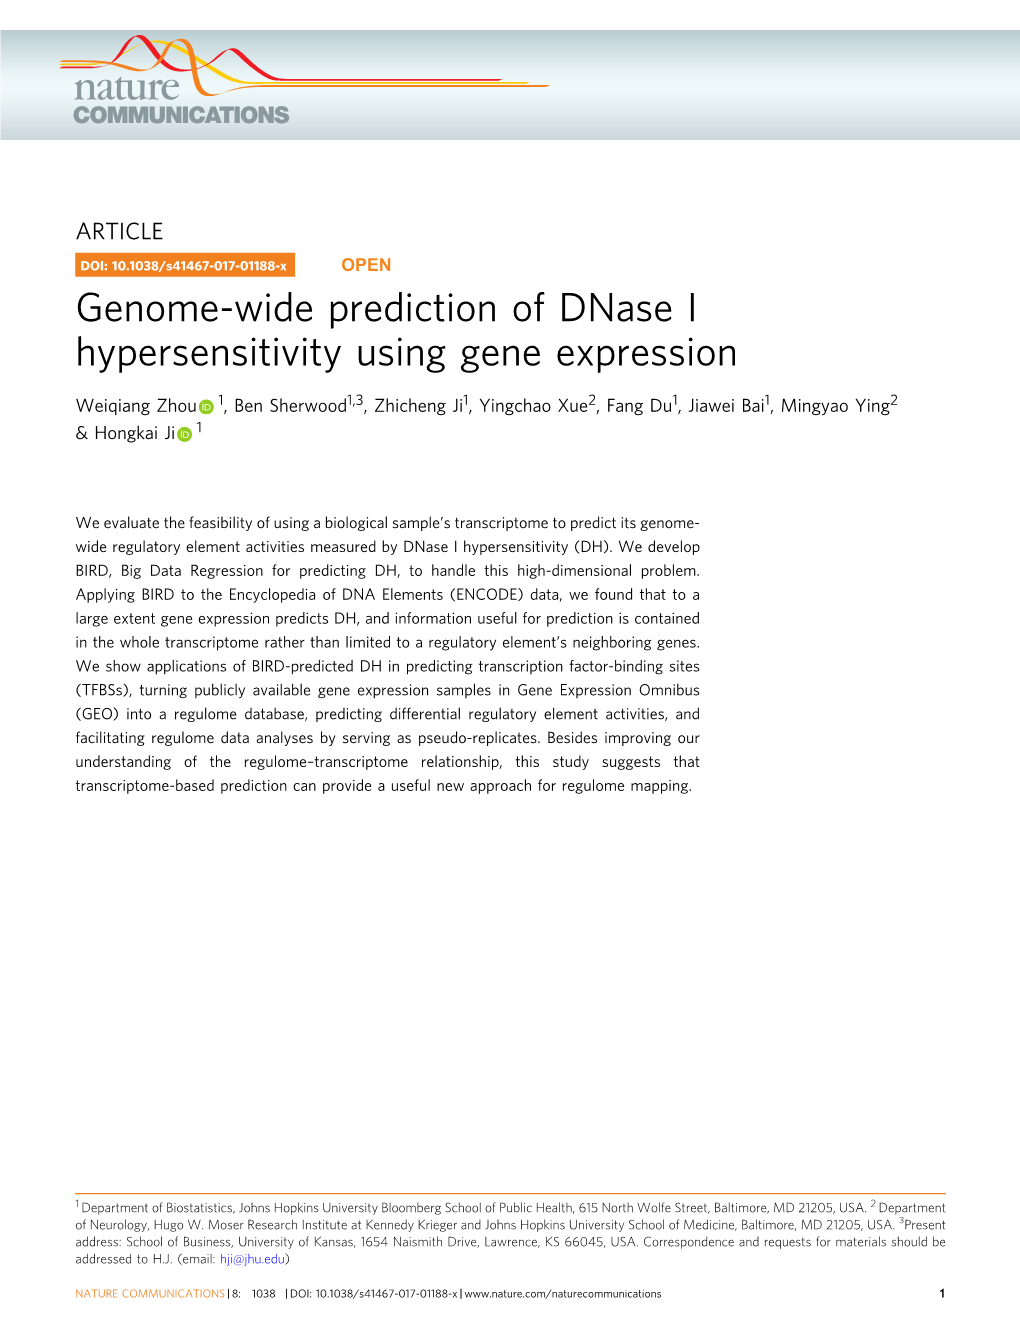 Genome-Wide Prediction of Dnase I Hypersensitivity Using Gene Expression